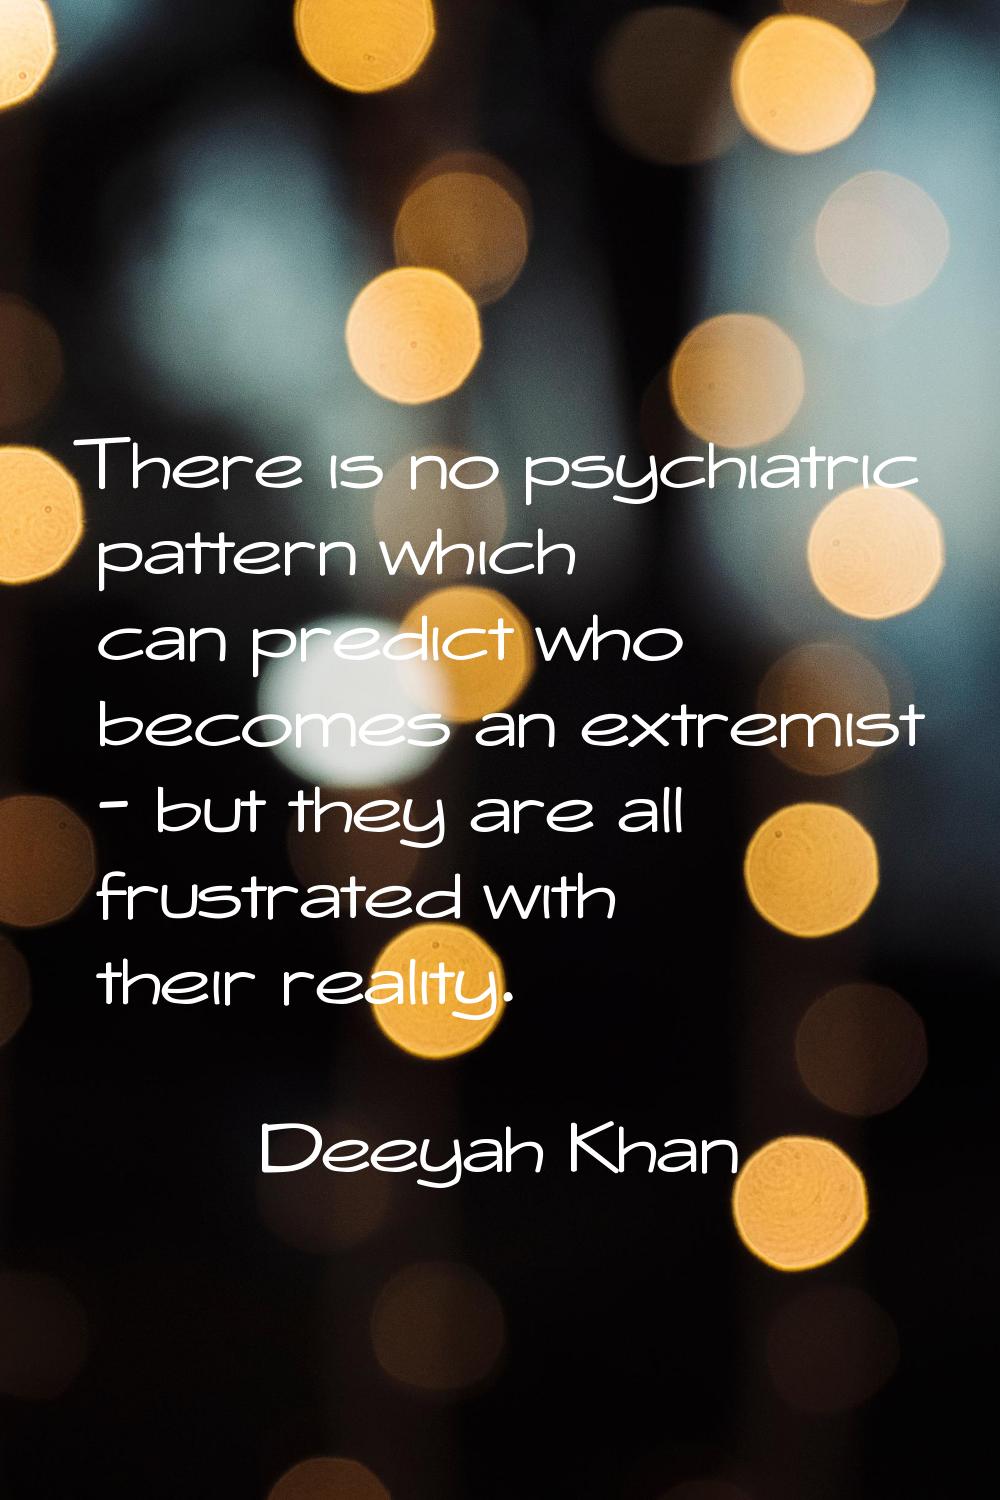 There is no psychiatric pattern which can predict who becomes an extremist - but they are all frust